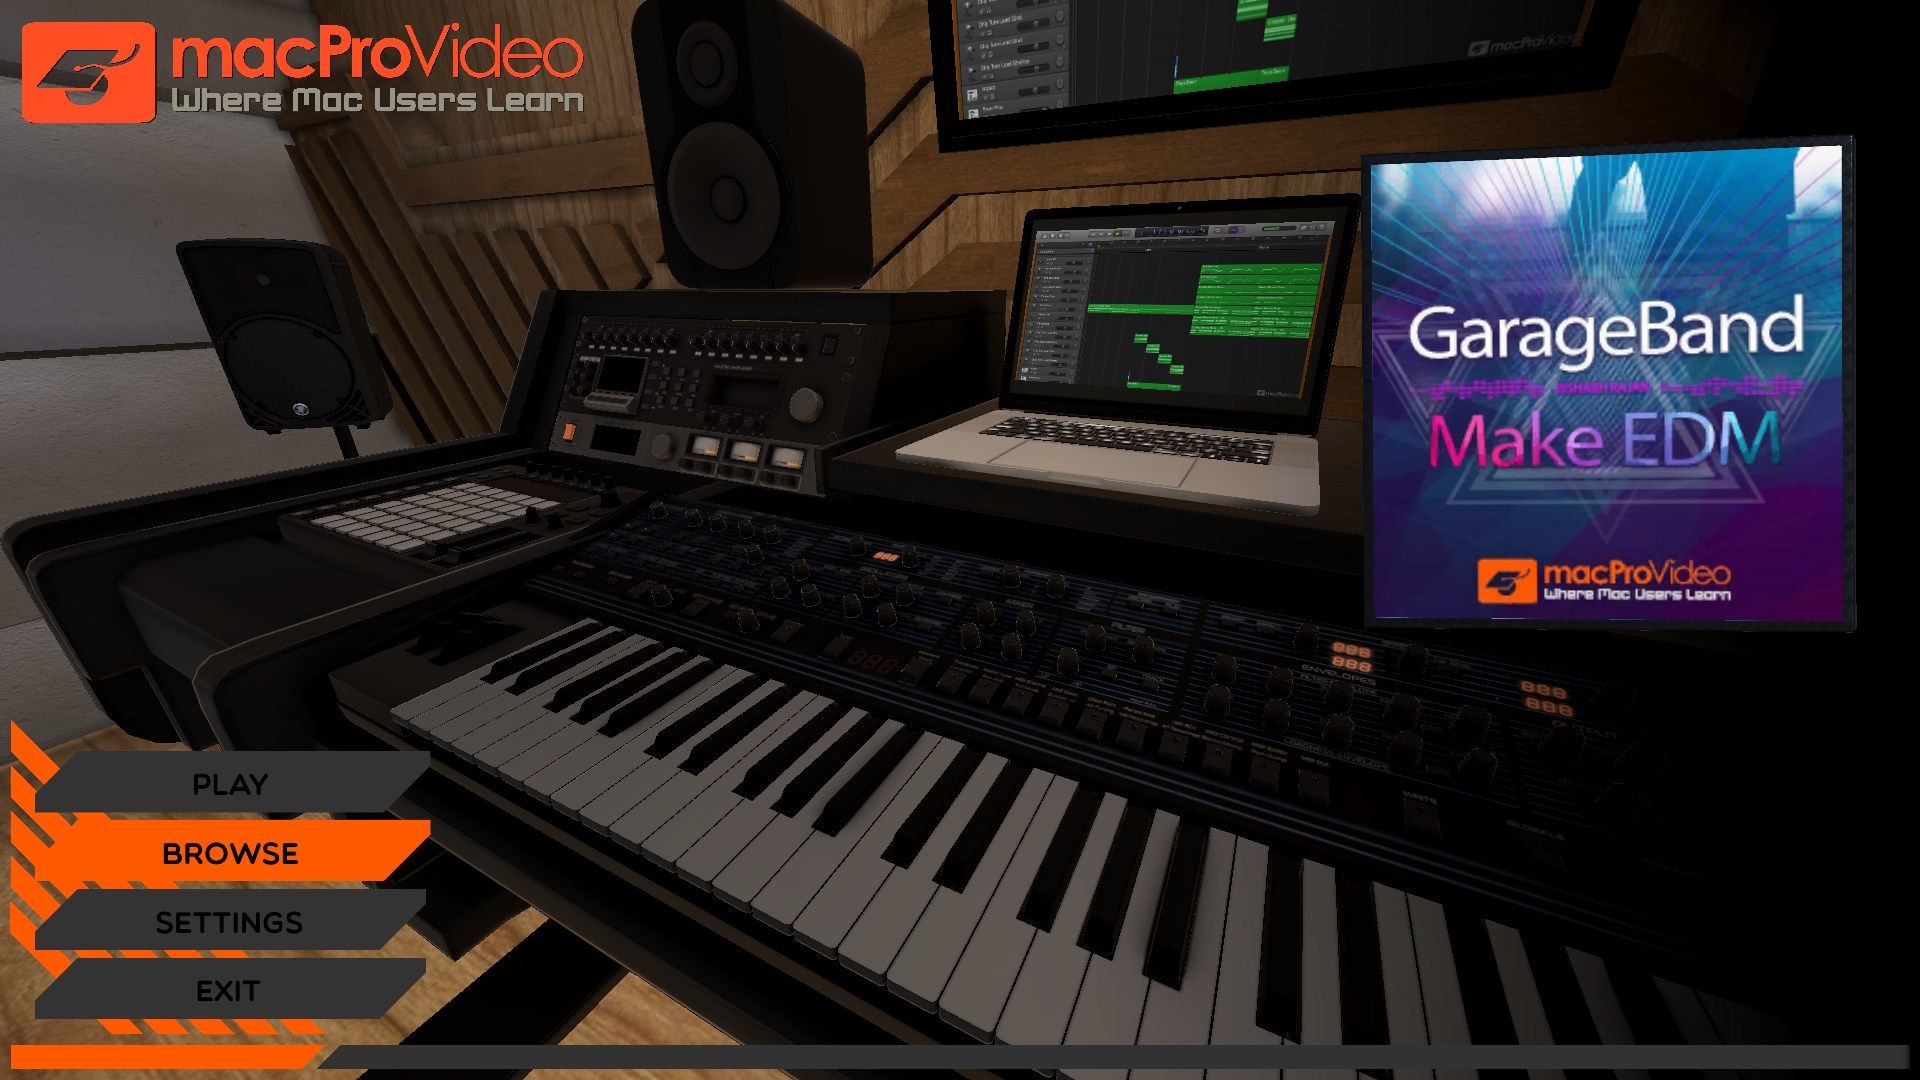 Make EDM Course For GarageBand by mPV